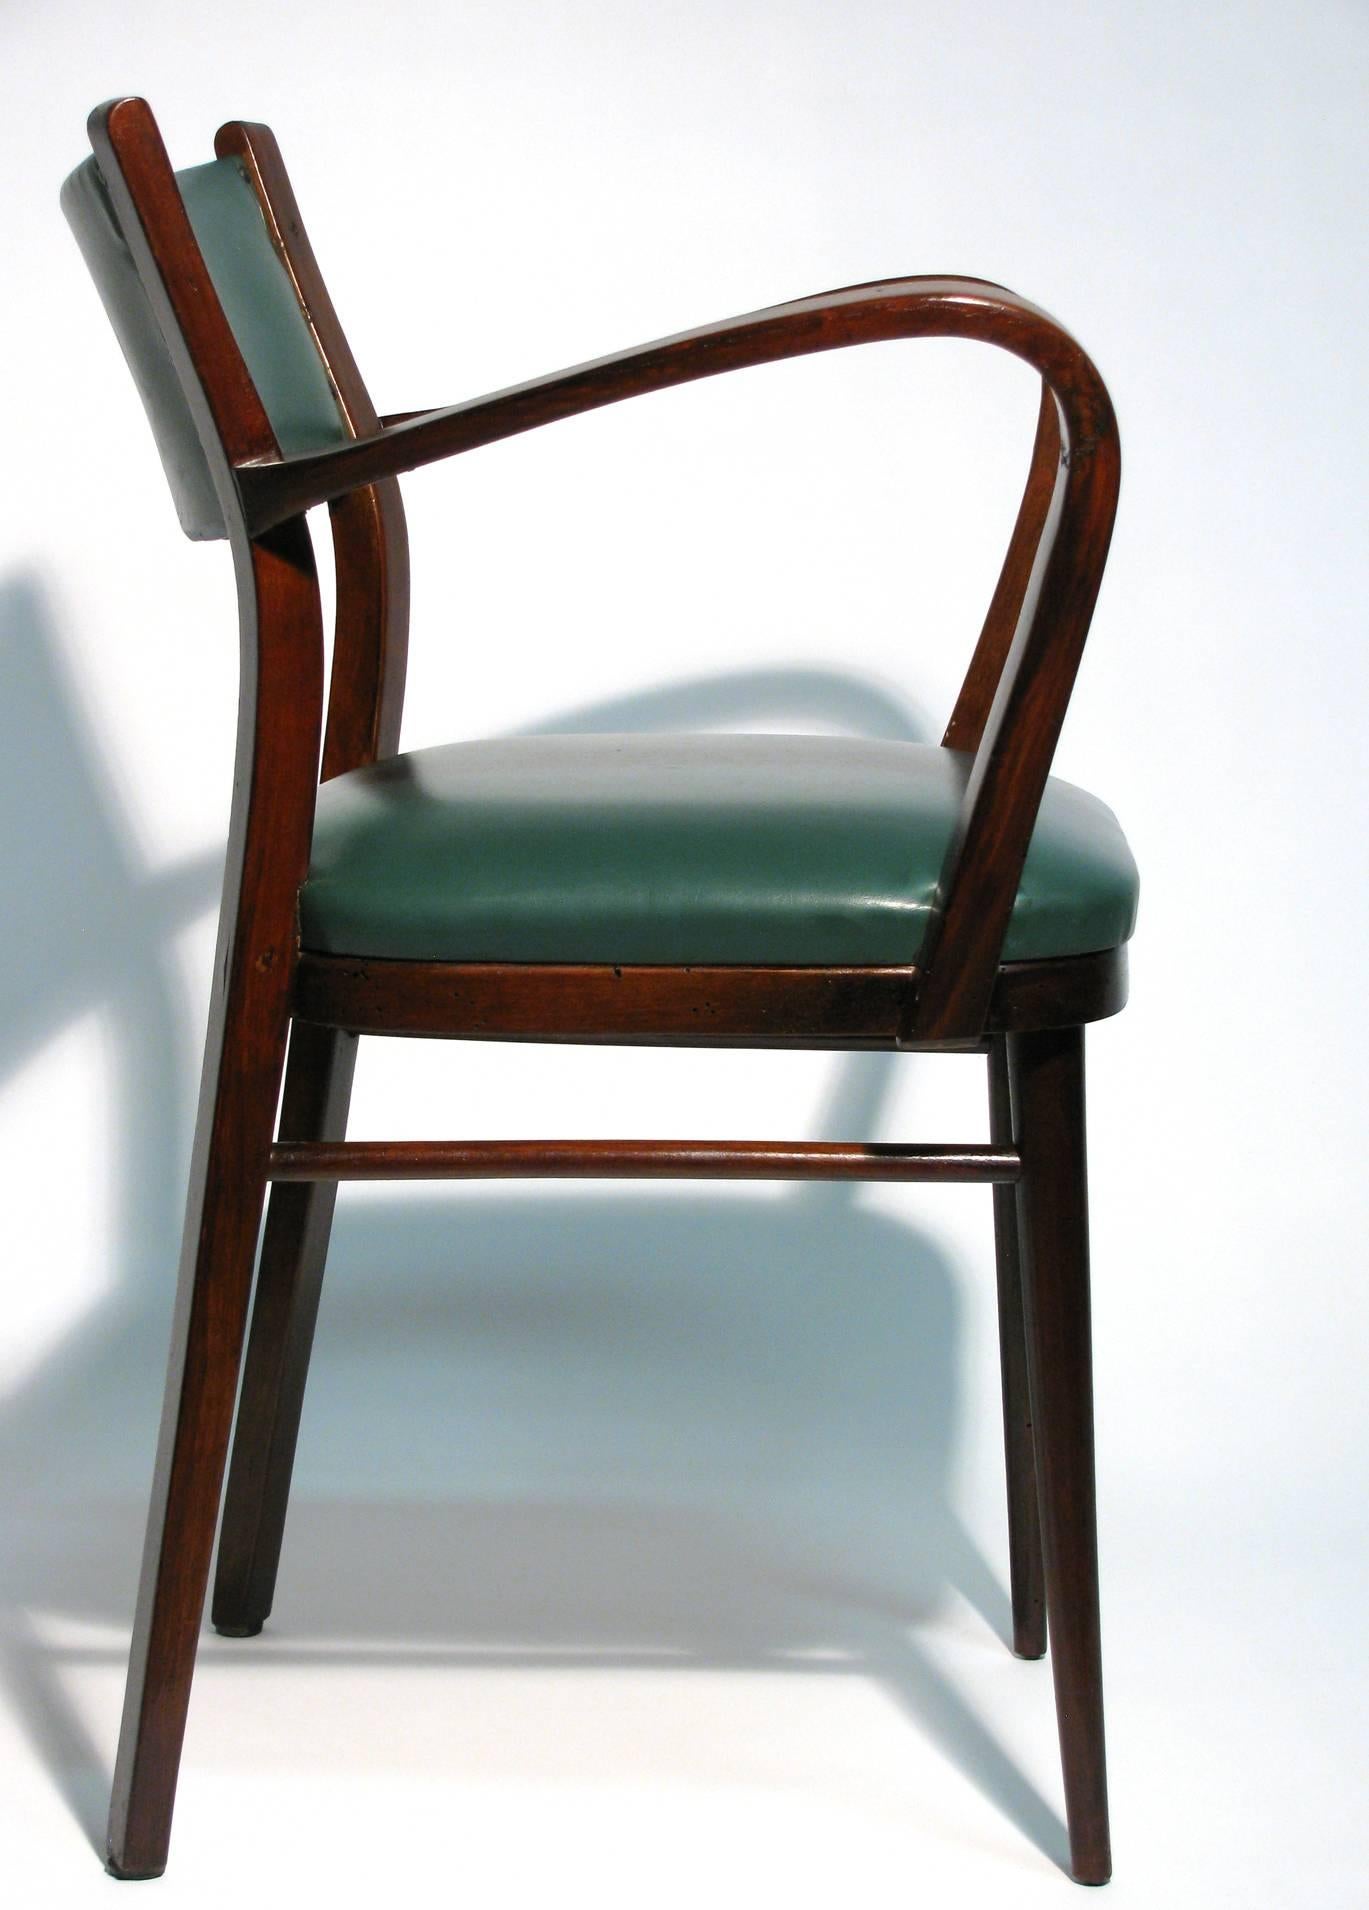 Classical style Italian bentwood chair with elaborate curved arms, side stretchers, and tapered legs. Upholstered with forest green faux leather, and trimmed with brass nails.